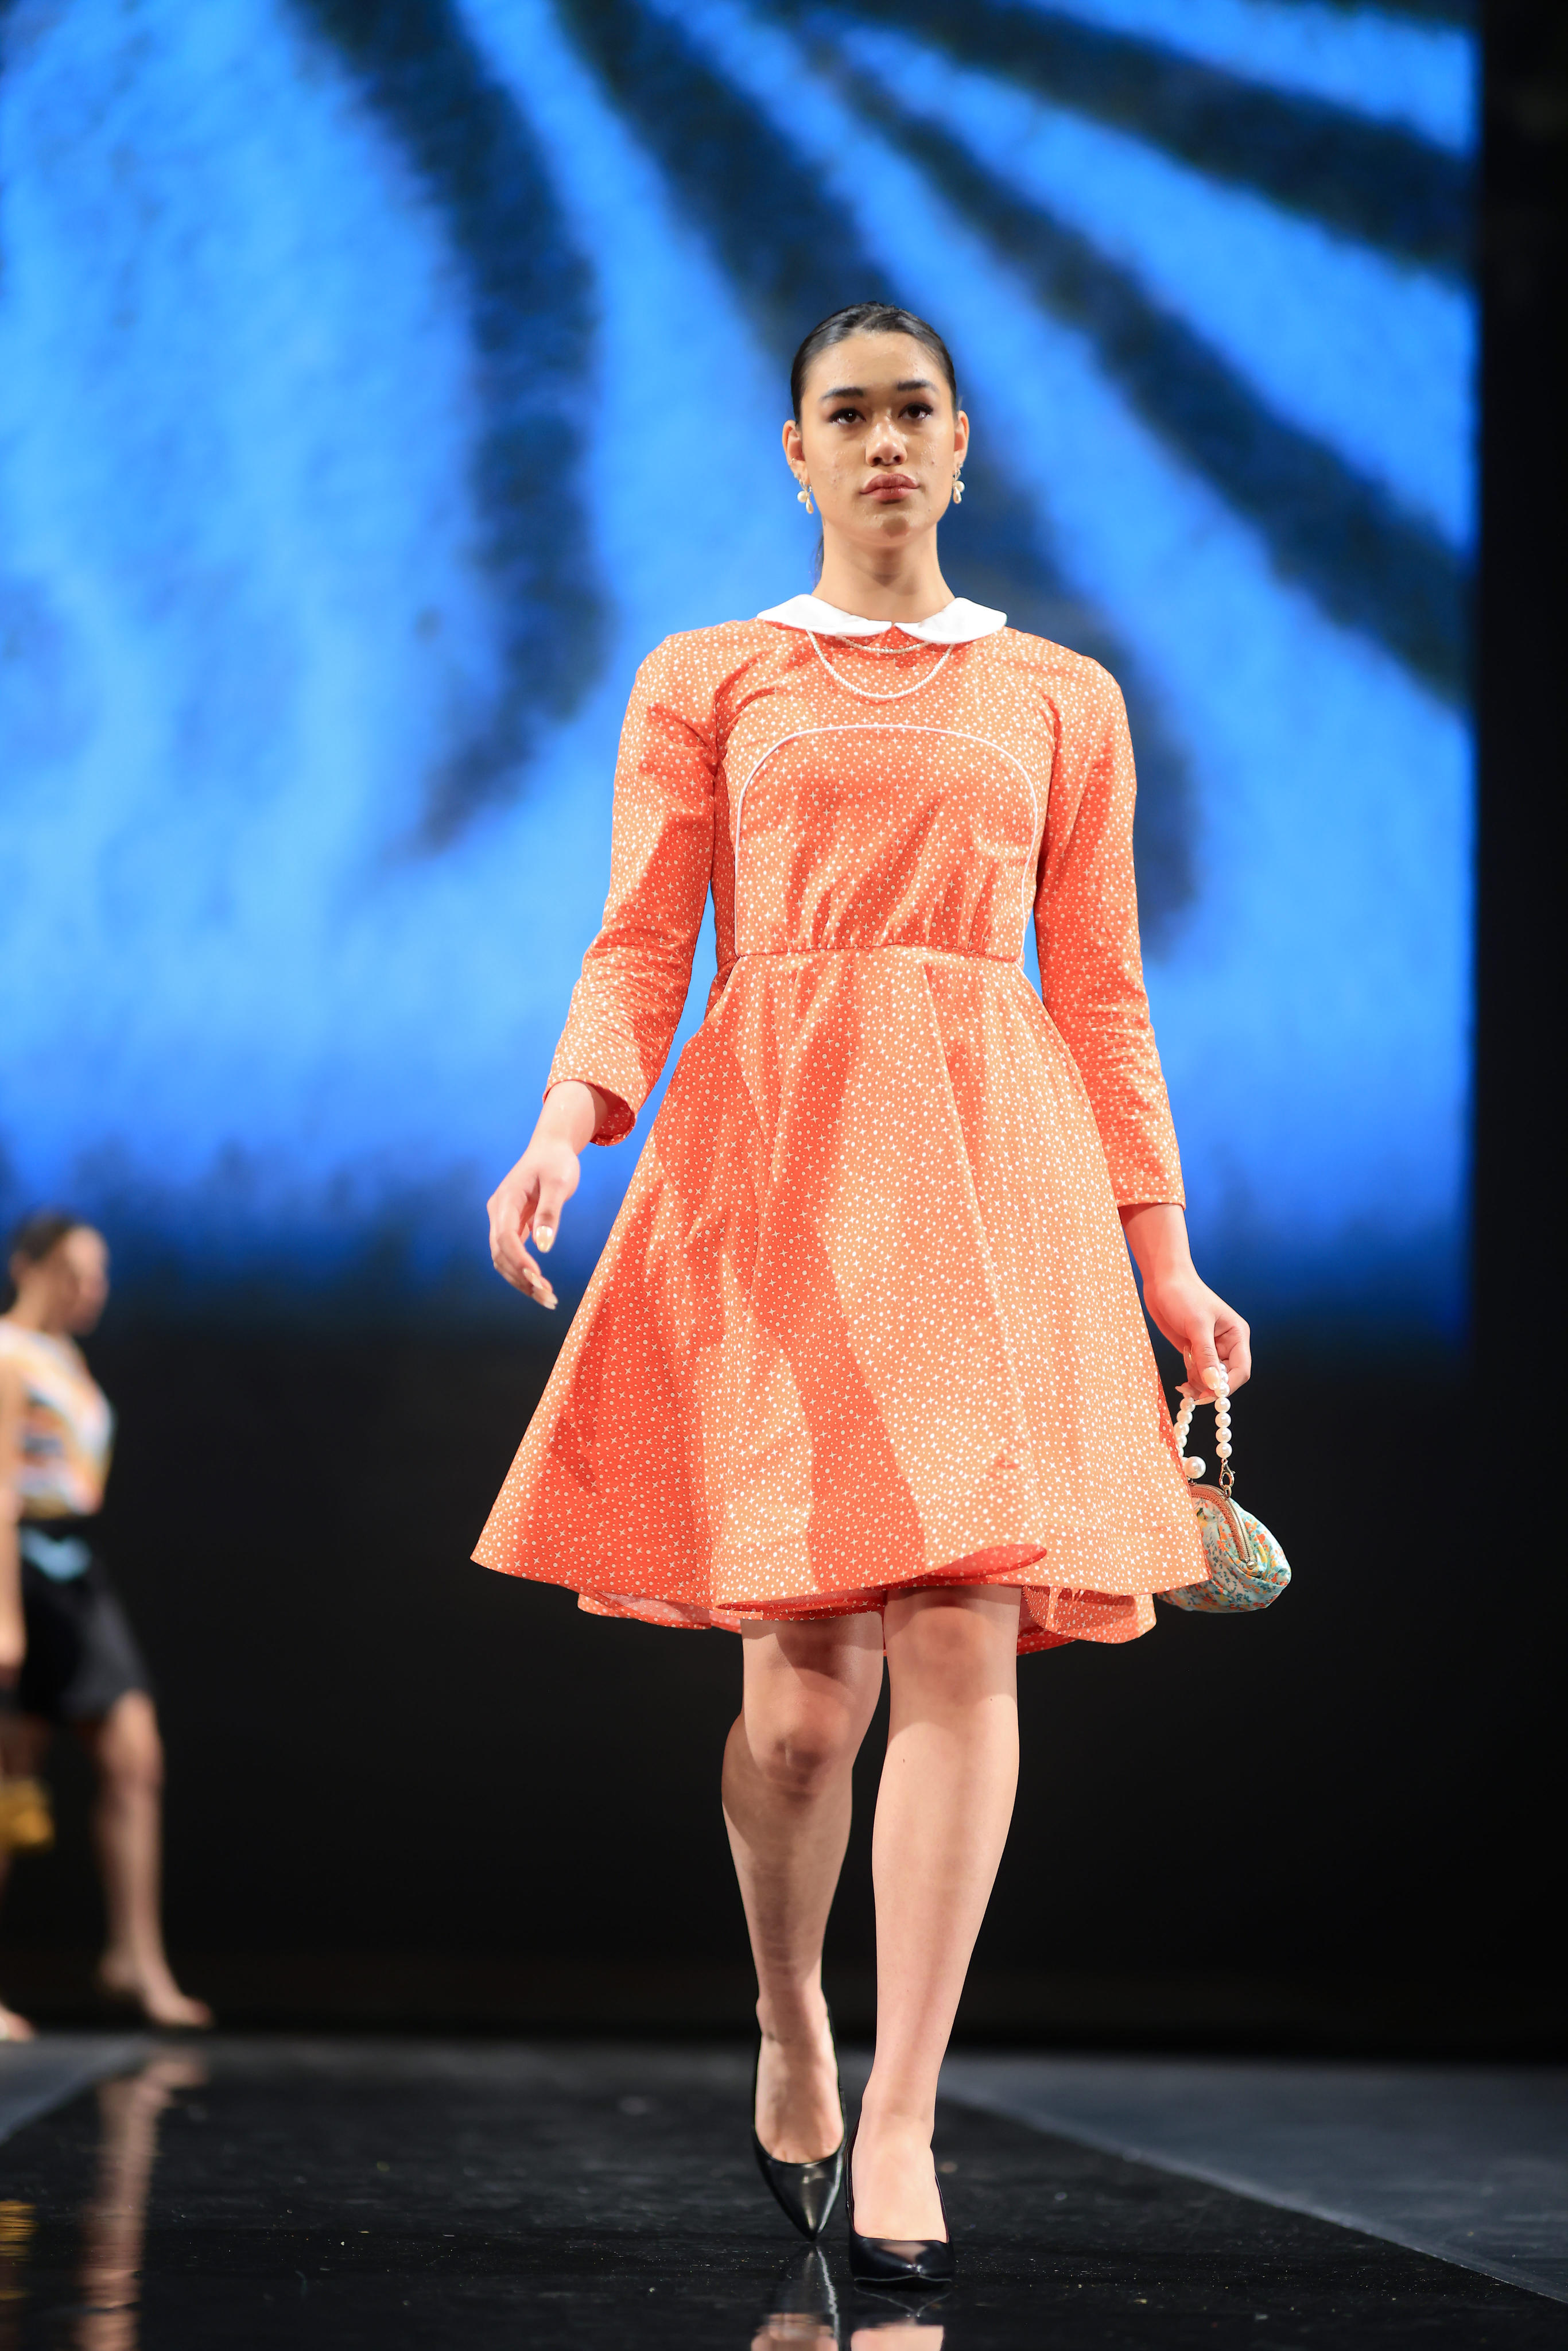 A model struts down the runway in a vibrant orange and white polka-dotted above-the-knee length dress, complemented by black heels. The ensemble is adorned with pearl earrings, and she carries a chic green and orange mini purse with pearl handles.